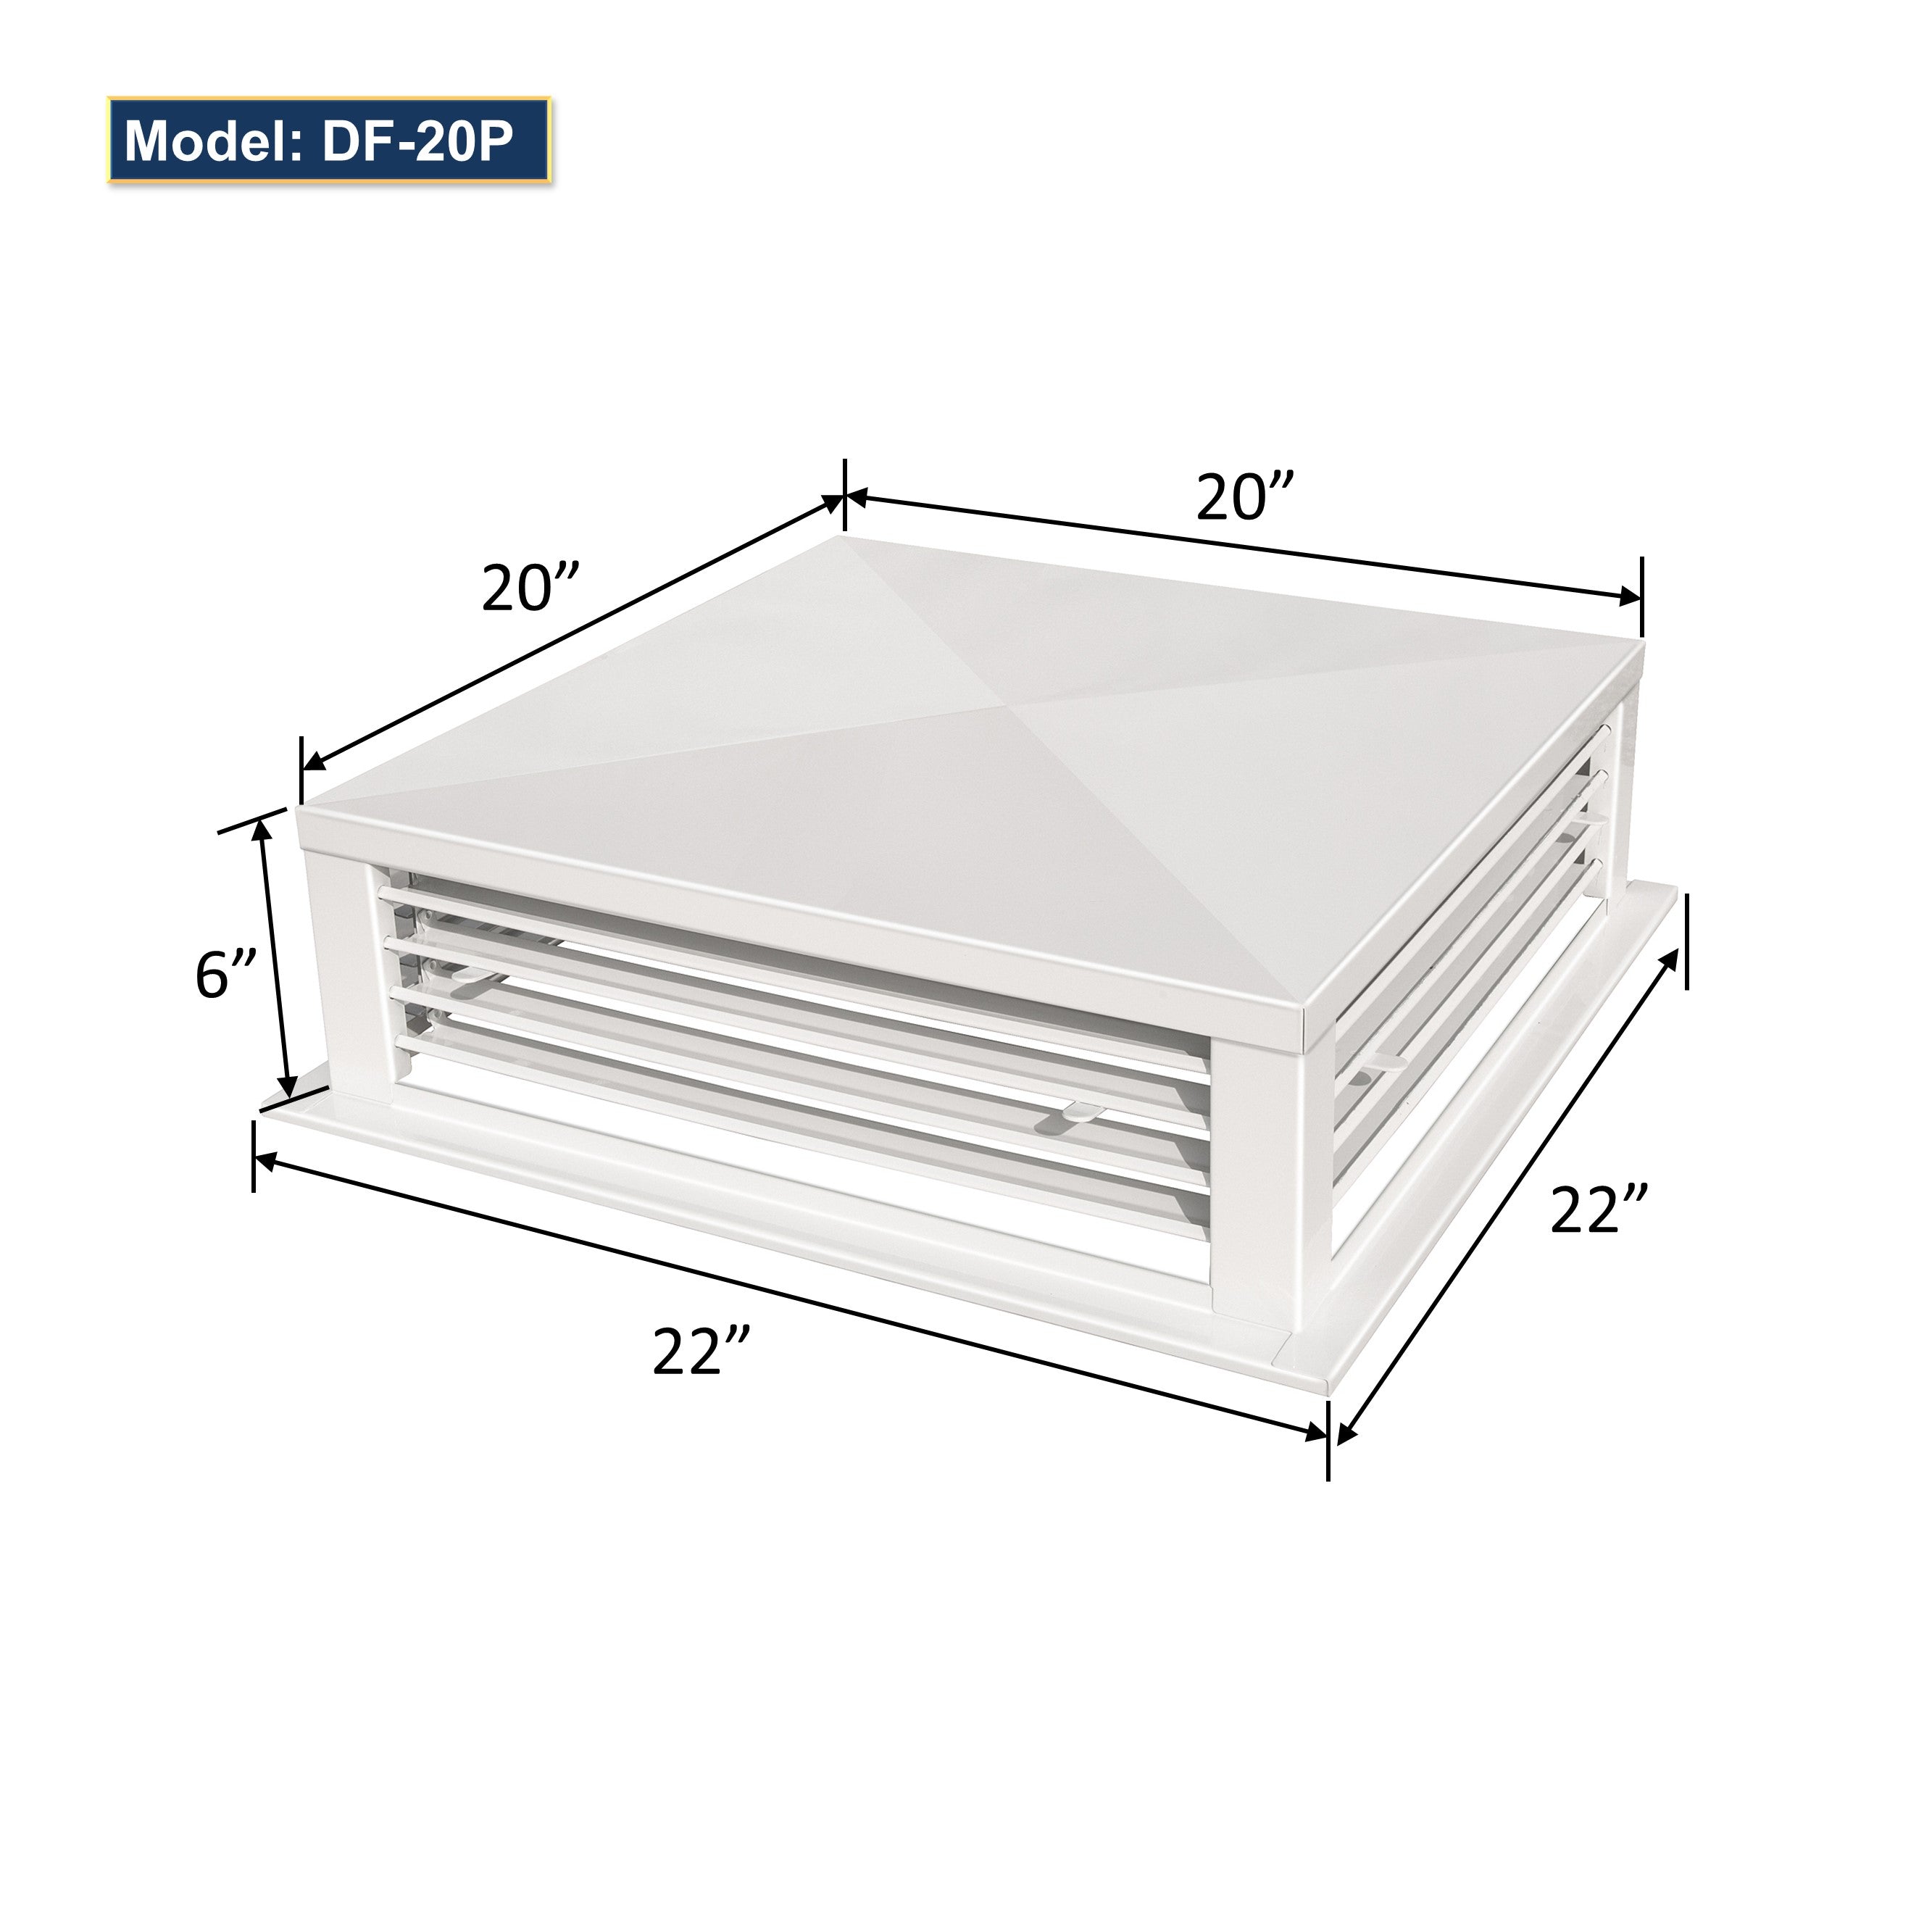 GSW 20" White Powder Coated 4-Way Adjustable Metal Diffuser for Evaporative/Swamp Cooler (20"x20"x6")